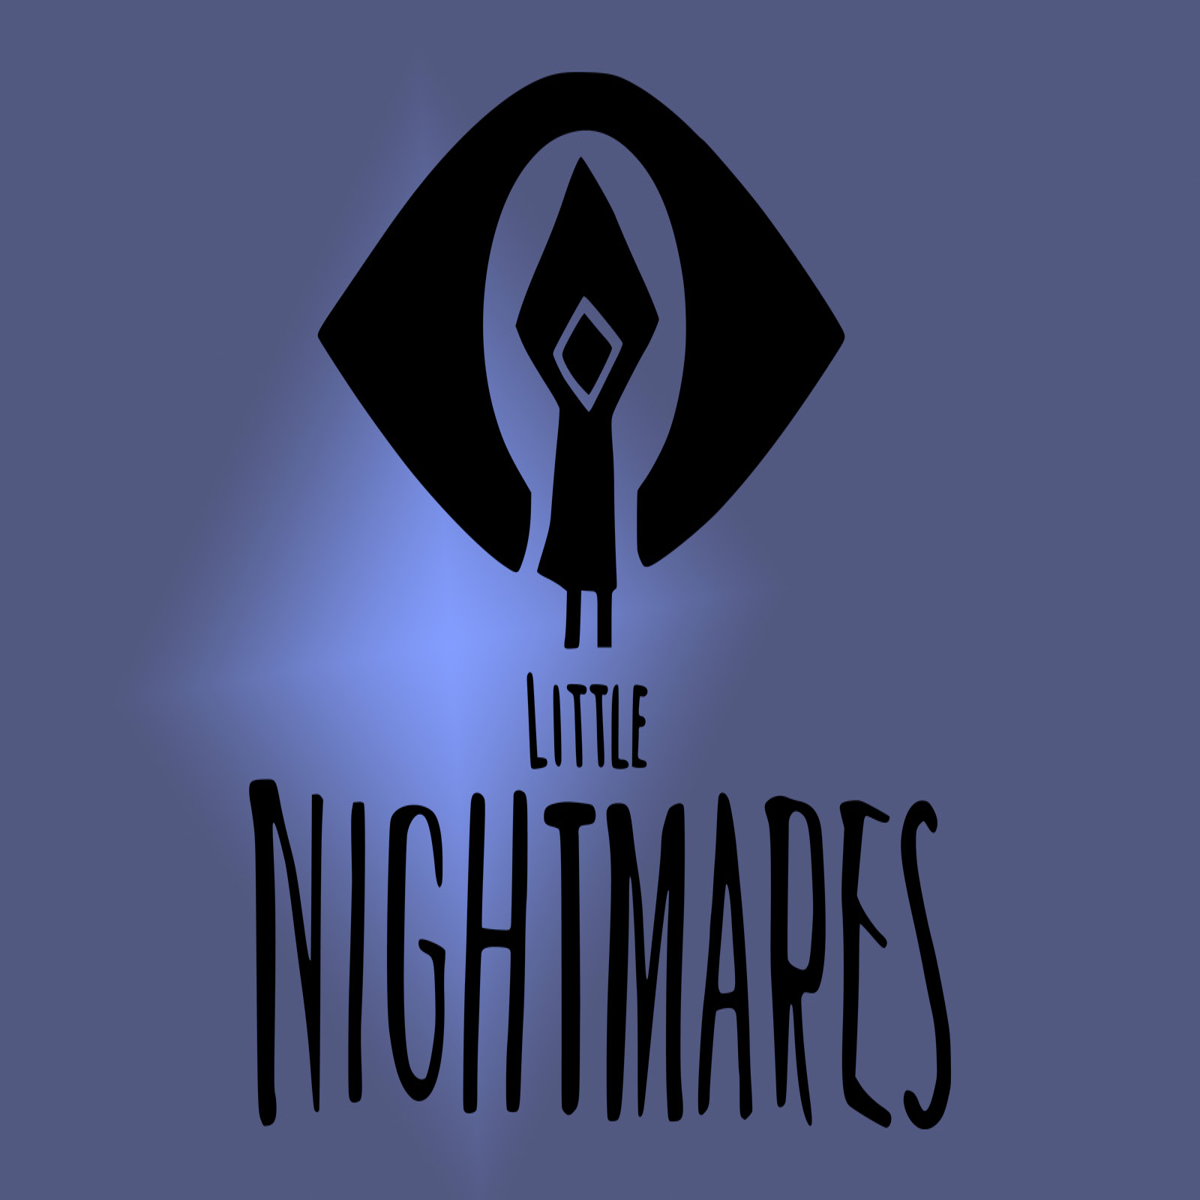 Little Nightmares II - Sony PlayStation 4 for sale online